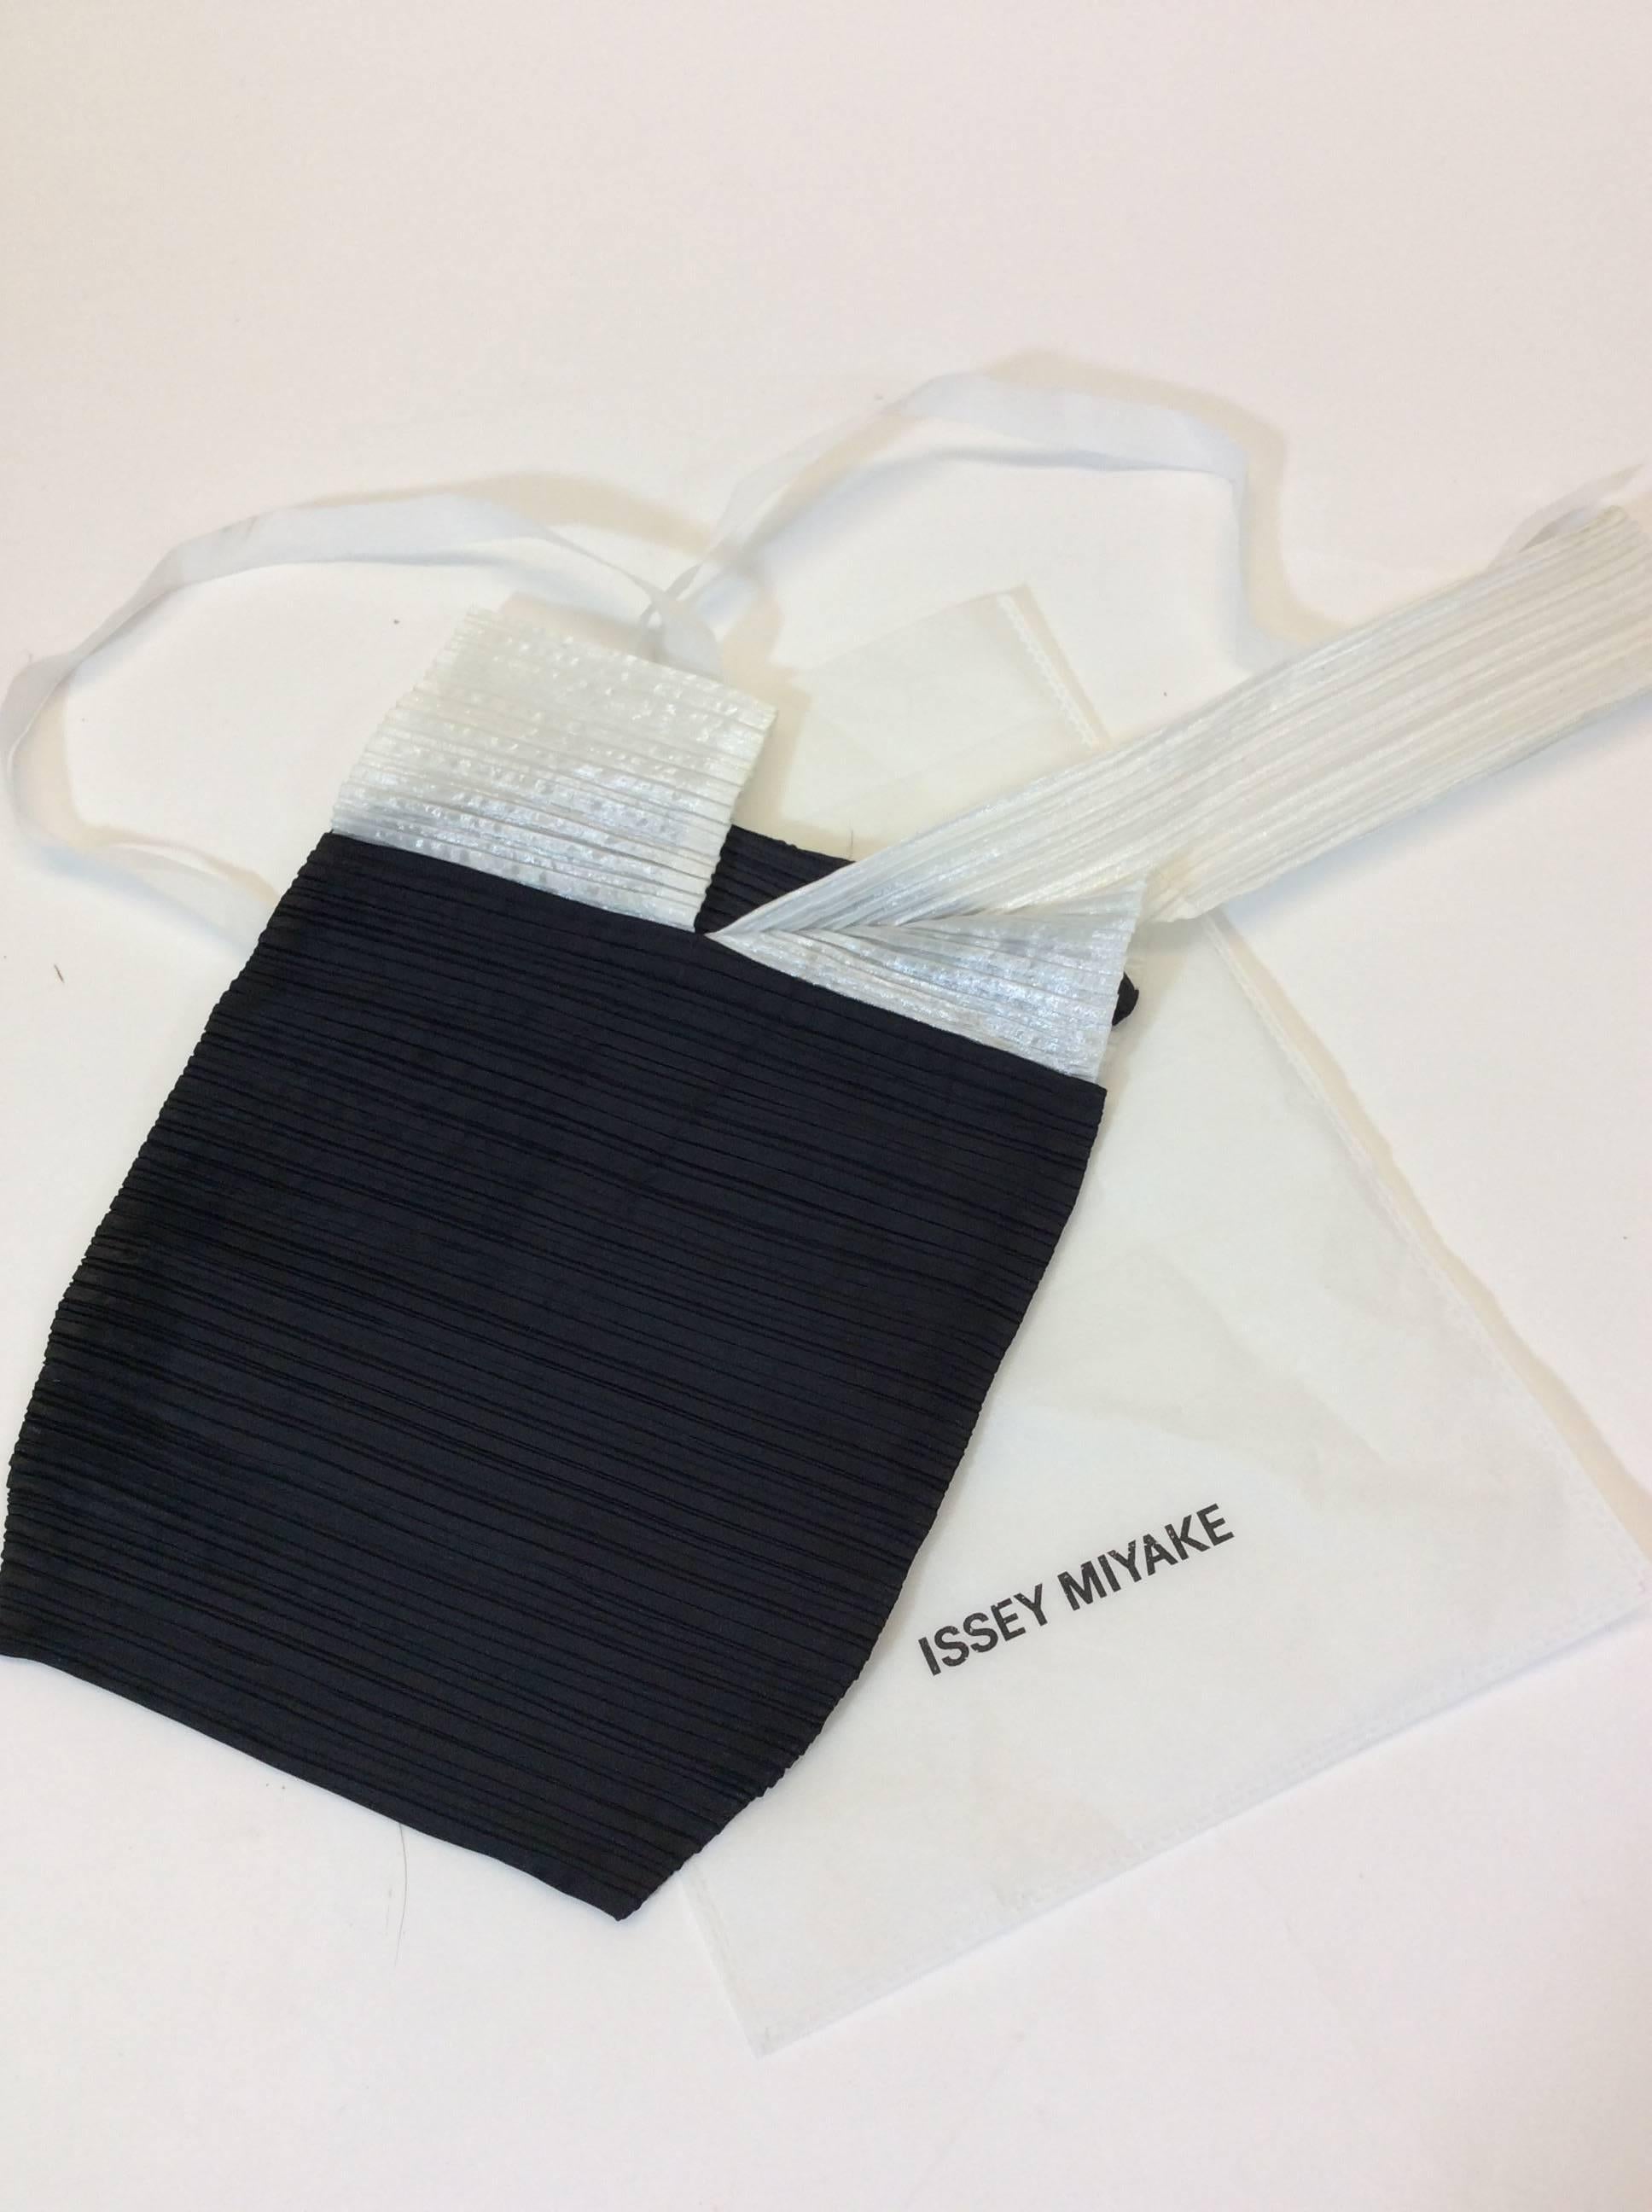 Black and White Pleated
Single Handle
Dust Bag included
Made in Japan
9